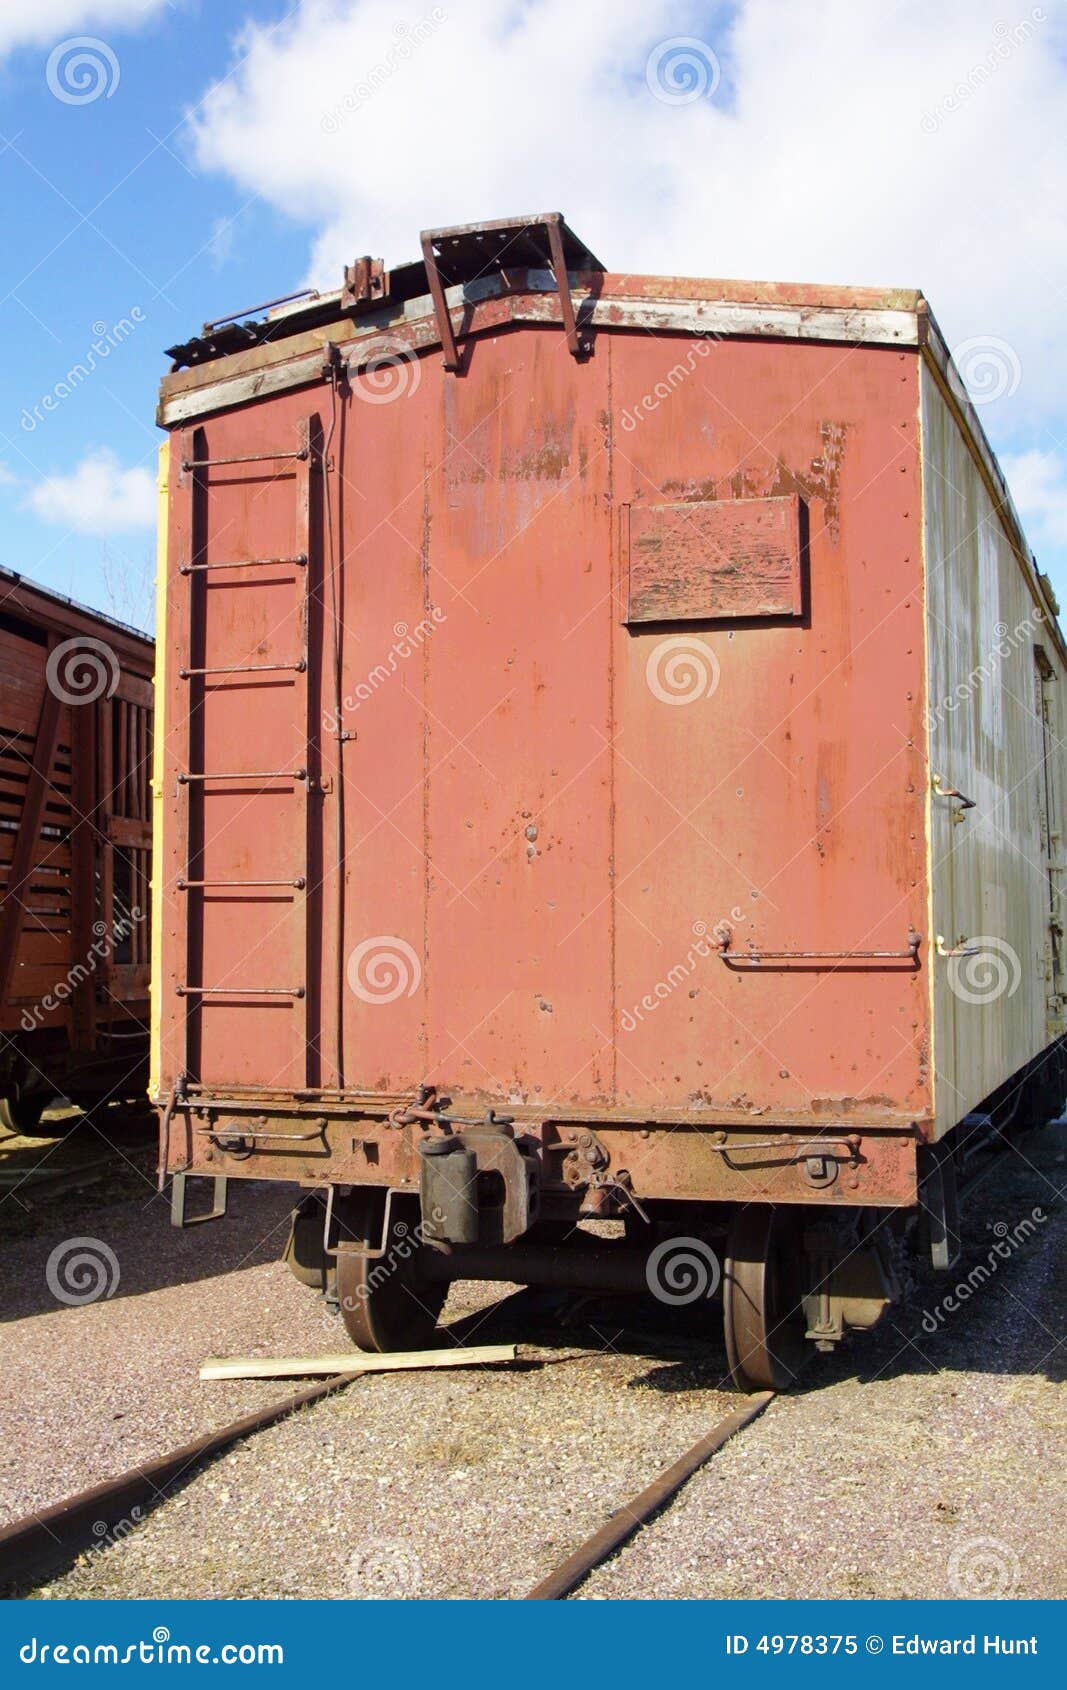 Old Box Car stock image. Image of freight, rail, tracks ...